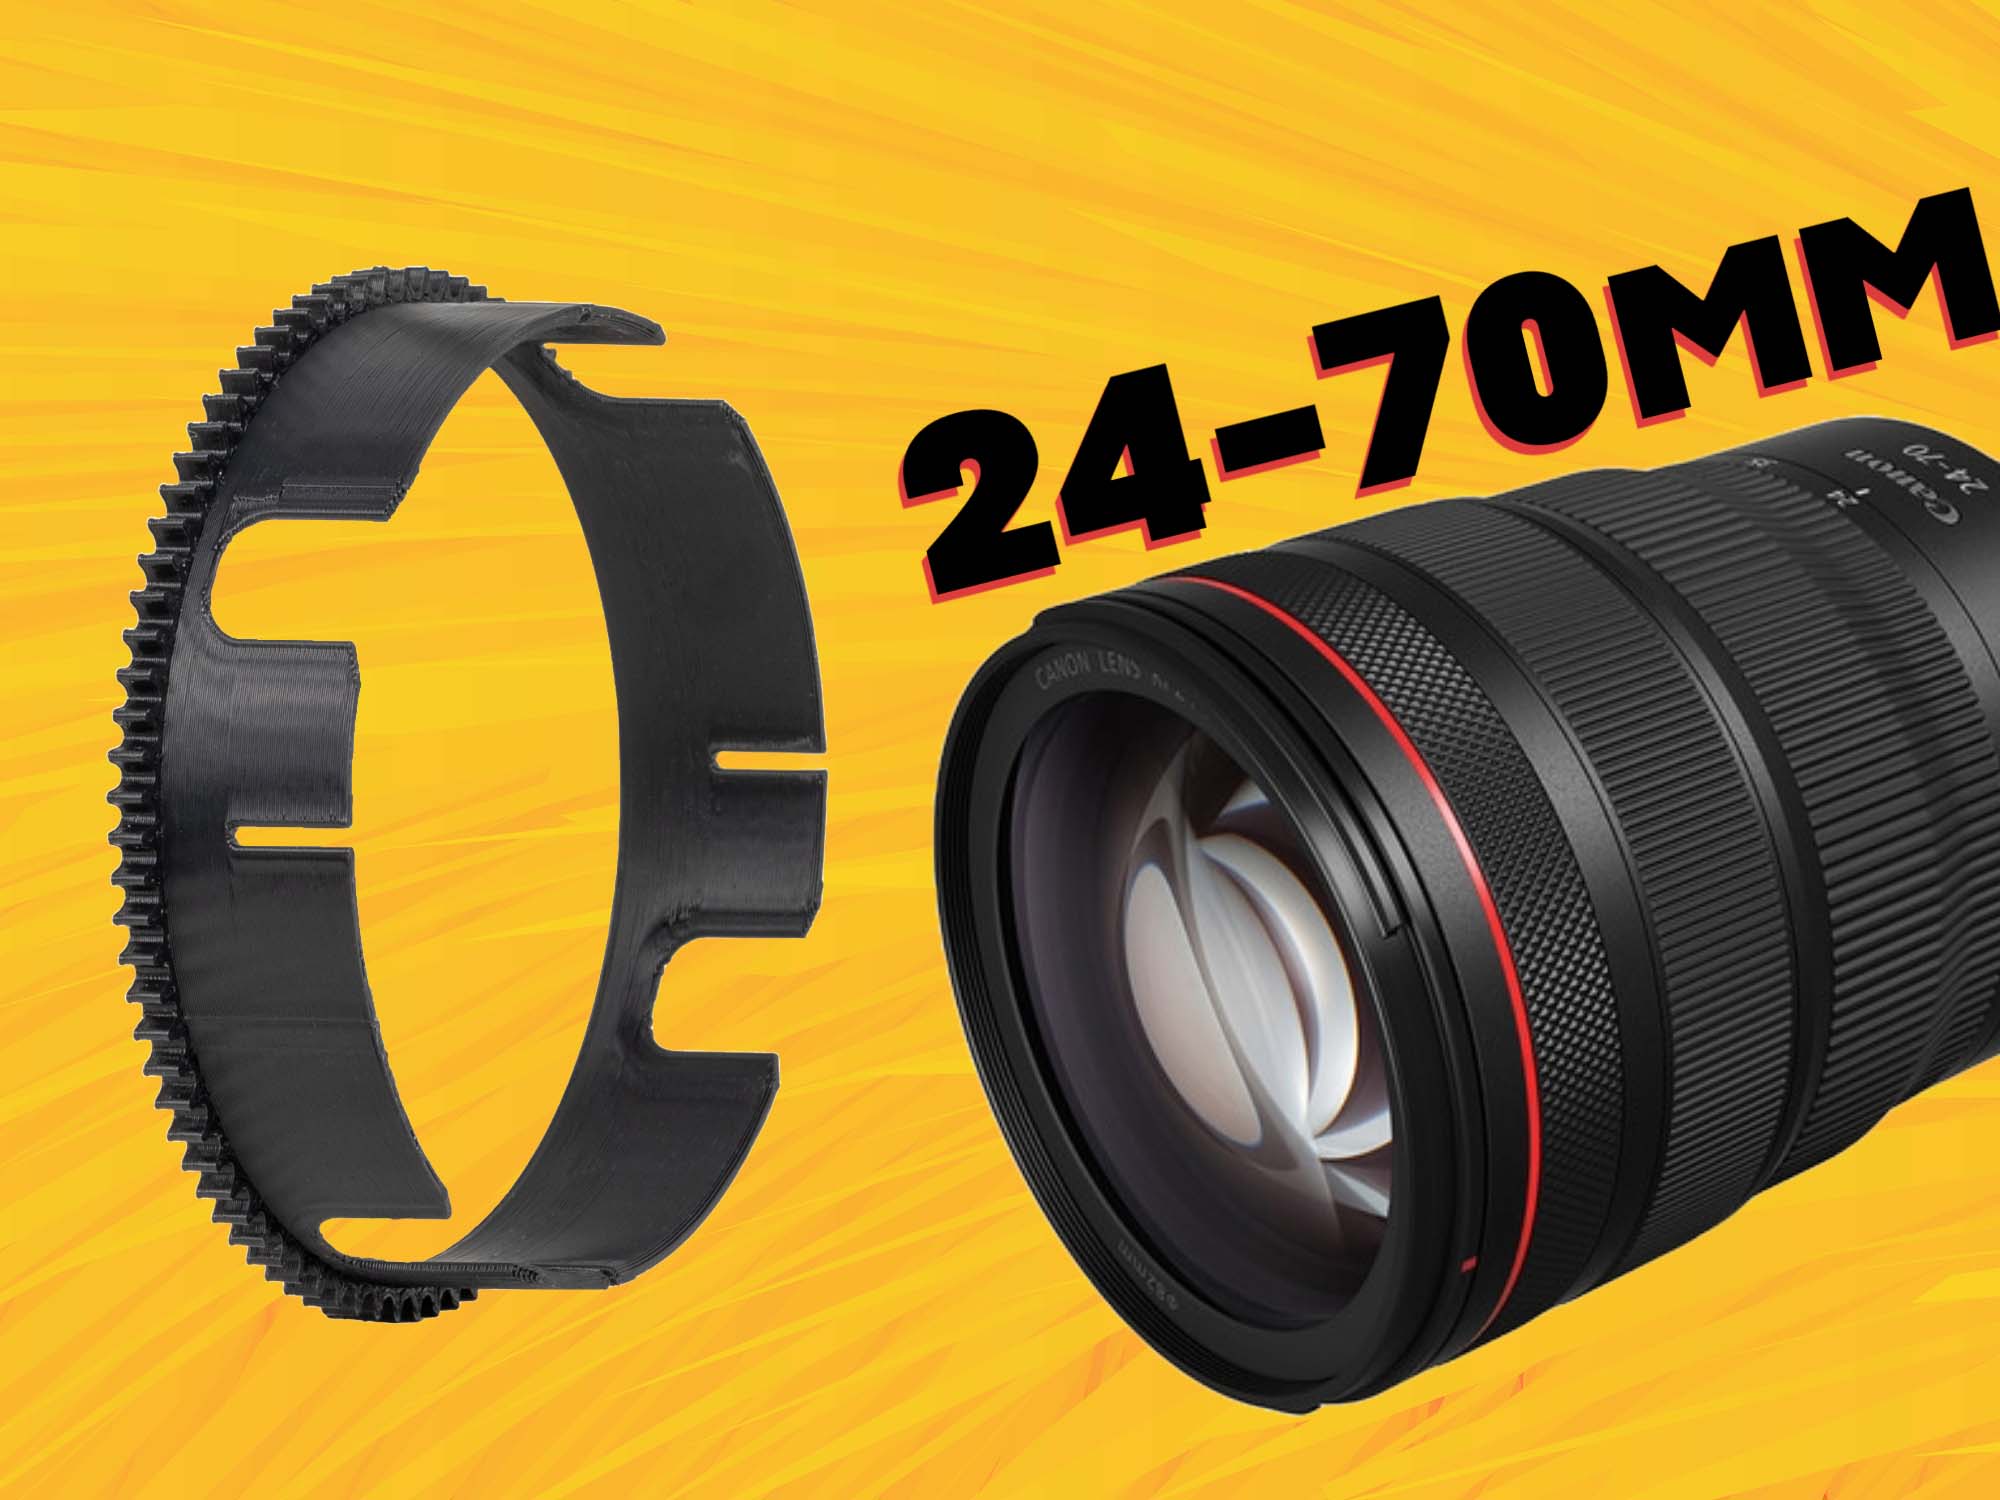 Canon RF 24-70mm Zoom Gear Assembly // Ikelite 200DL Underwater Housing [VIDEO]